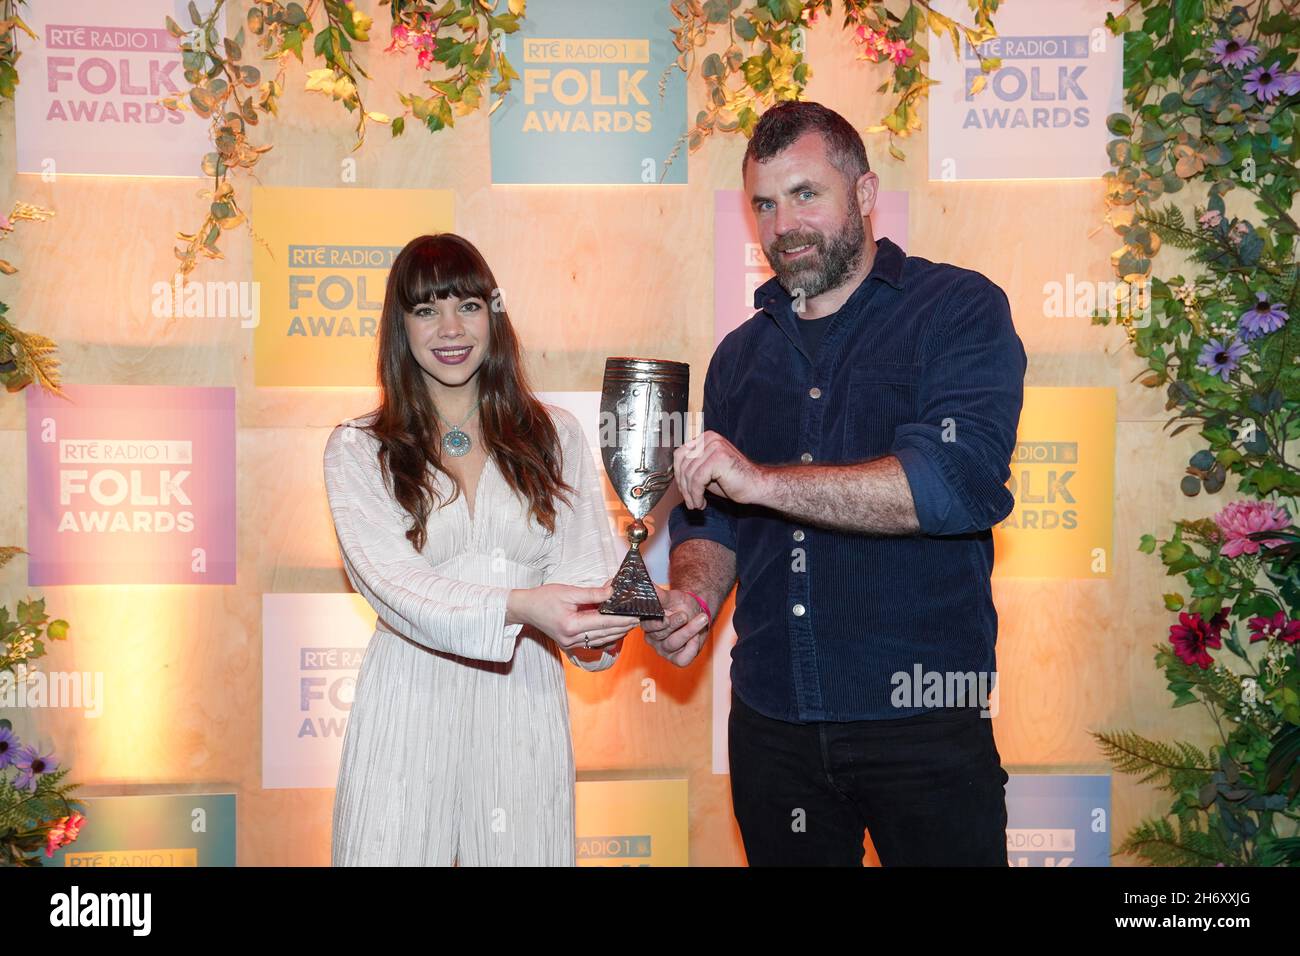 Susan O'Neill and Mick Flannery with their Best Original Folk Track award at the RTE Radio 1 Folk Awards at Vicar Street in Dublin. Picture date: Tuesday November 16, 2021. Stock Photo